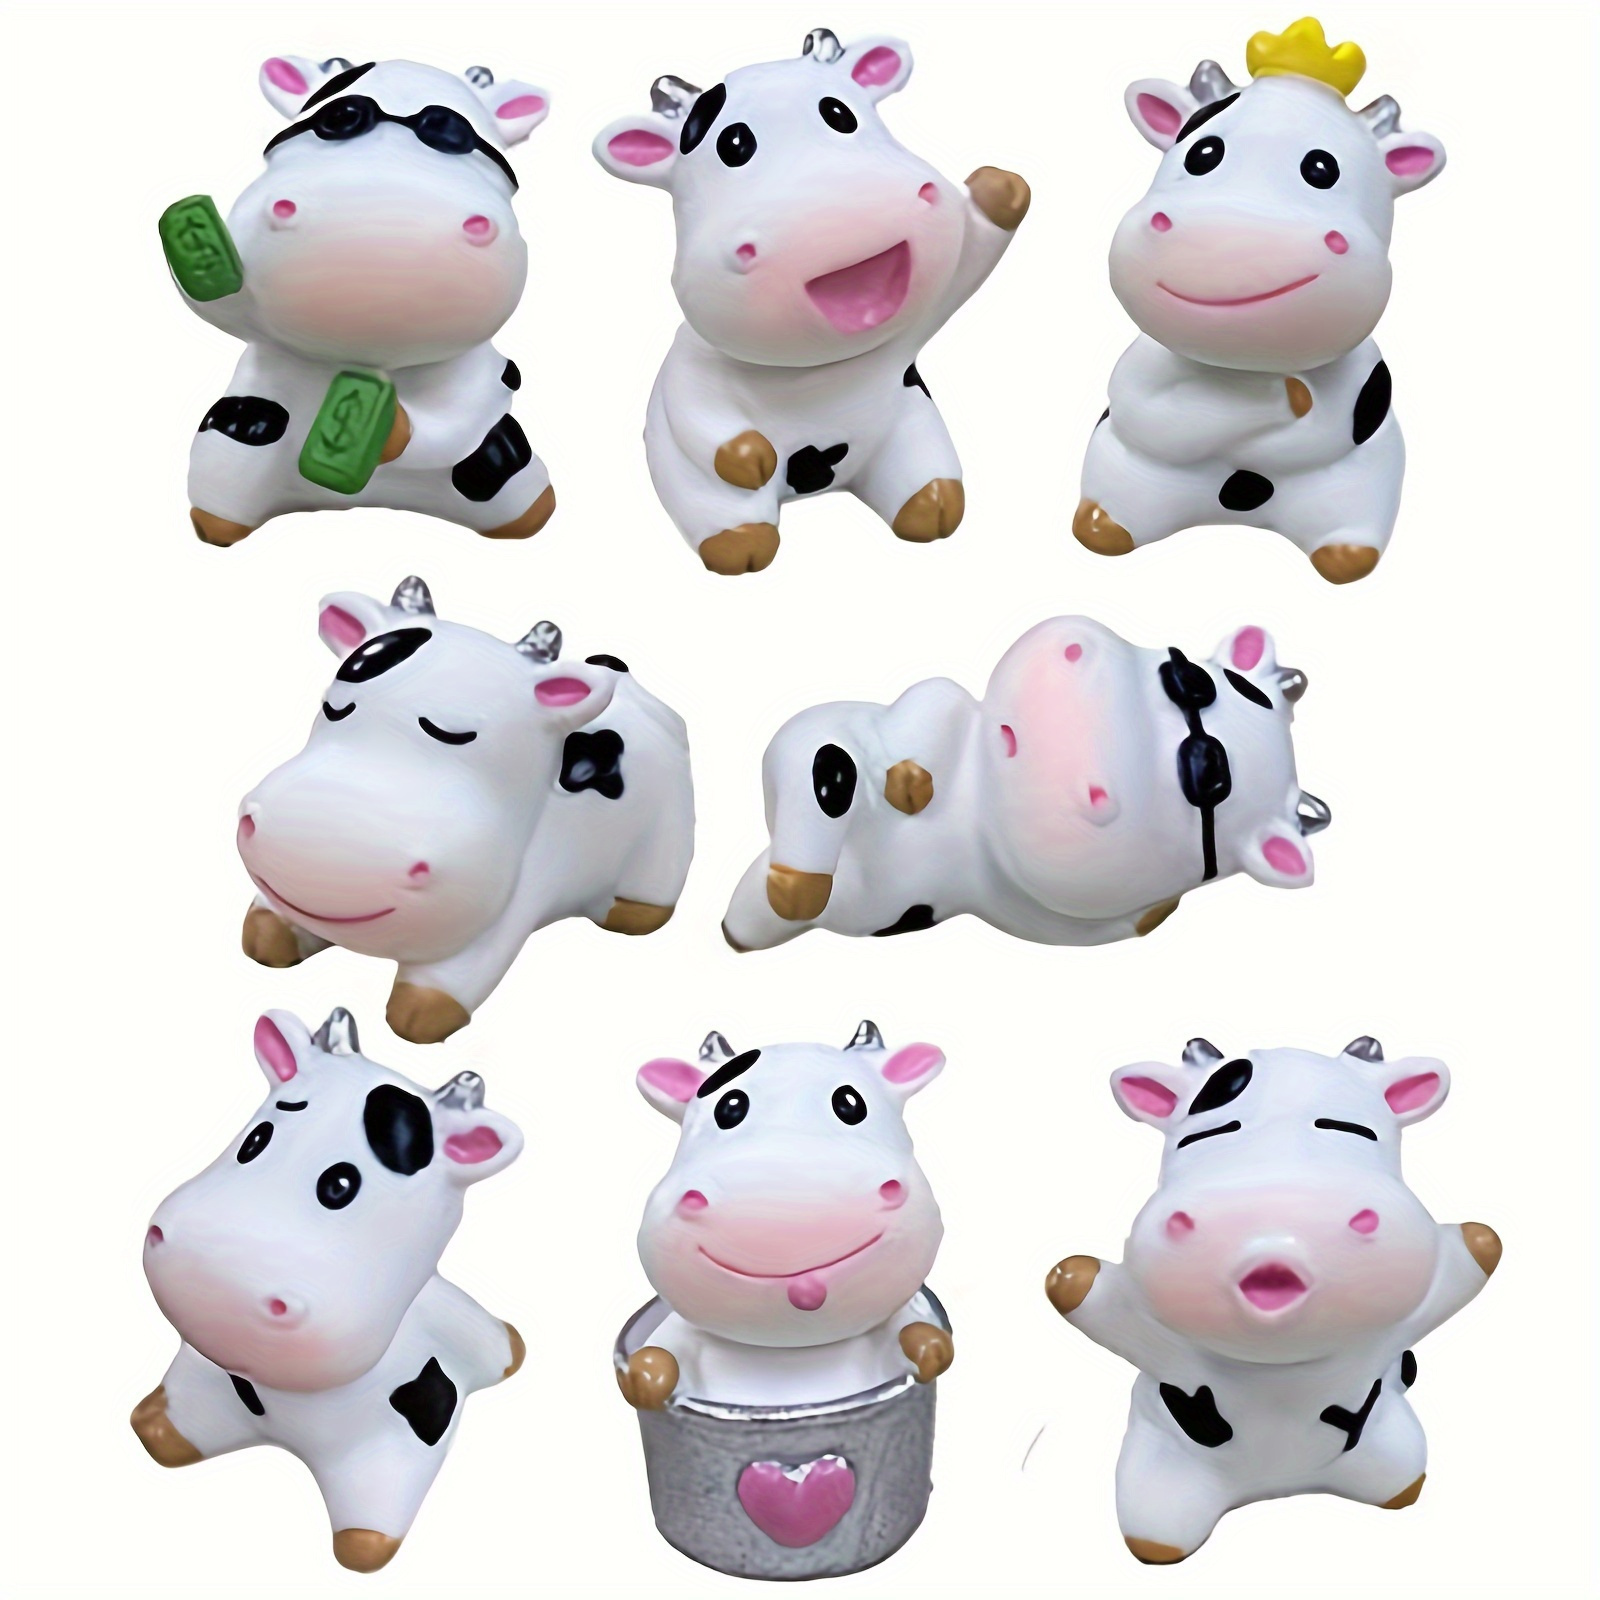 

8pcs Mini Cow Figures Set, Contemporary Resin Animal Toys, Cake Toppers, Fairy Garden Miniature Figurines, Ideal For Christmas Birthday Gifts & Desk Decorations